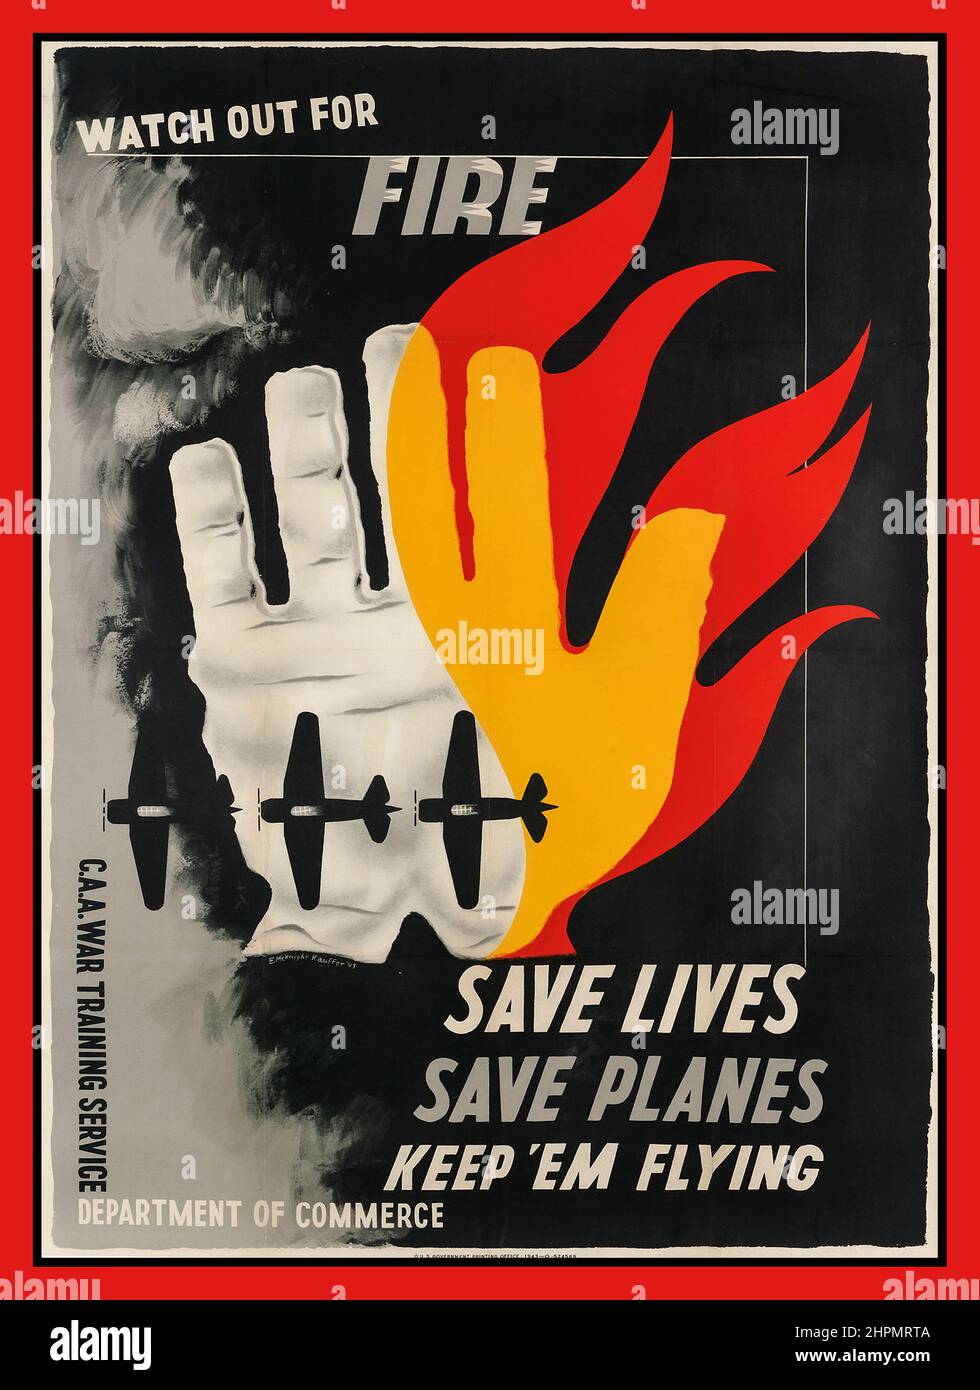 WW2 Advisory Propaganda Appeal USA Poster ' Watch Out For Fire' by EDWARD MCKNIGHT KAUFFER (1890-1954)  SAVE LIVES SAVE PLANES. KEEP EM FLYING. 1943. . U.S. Government Printing Office, [Washington, D.C.] USA Stock Photo